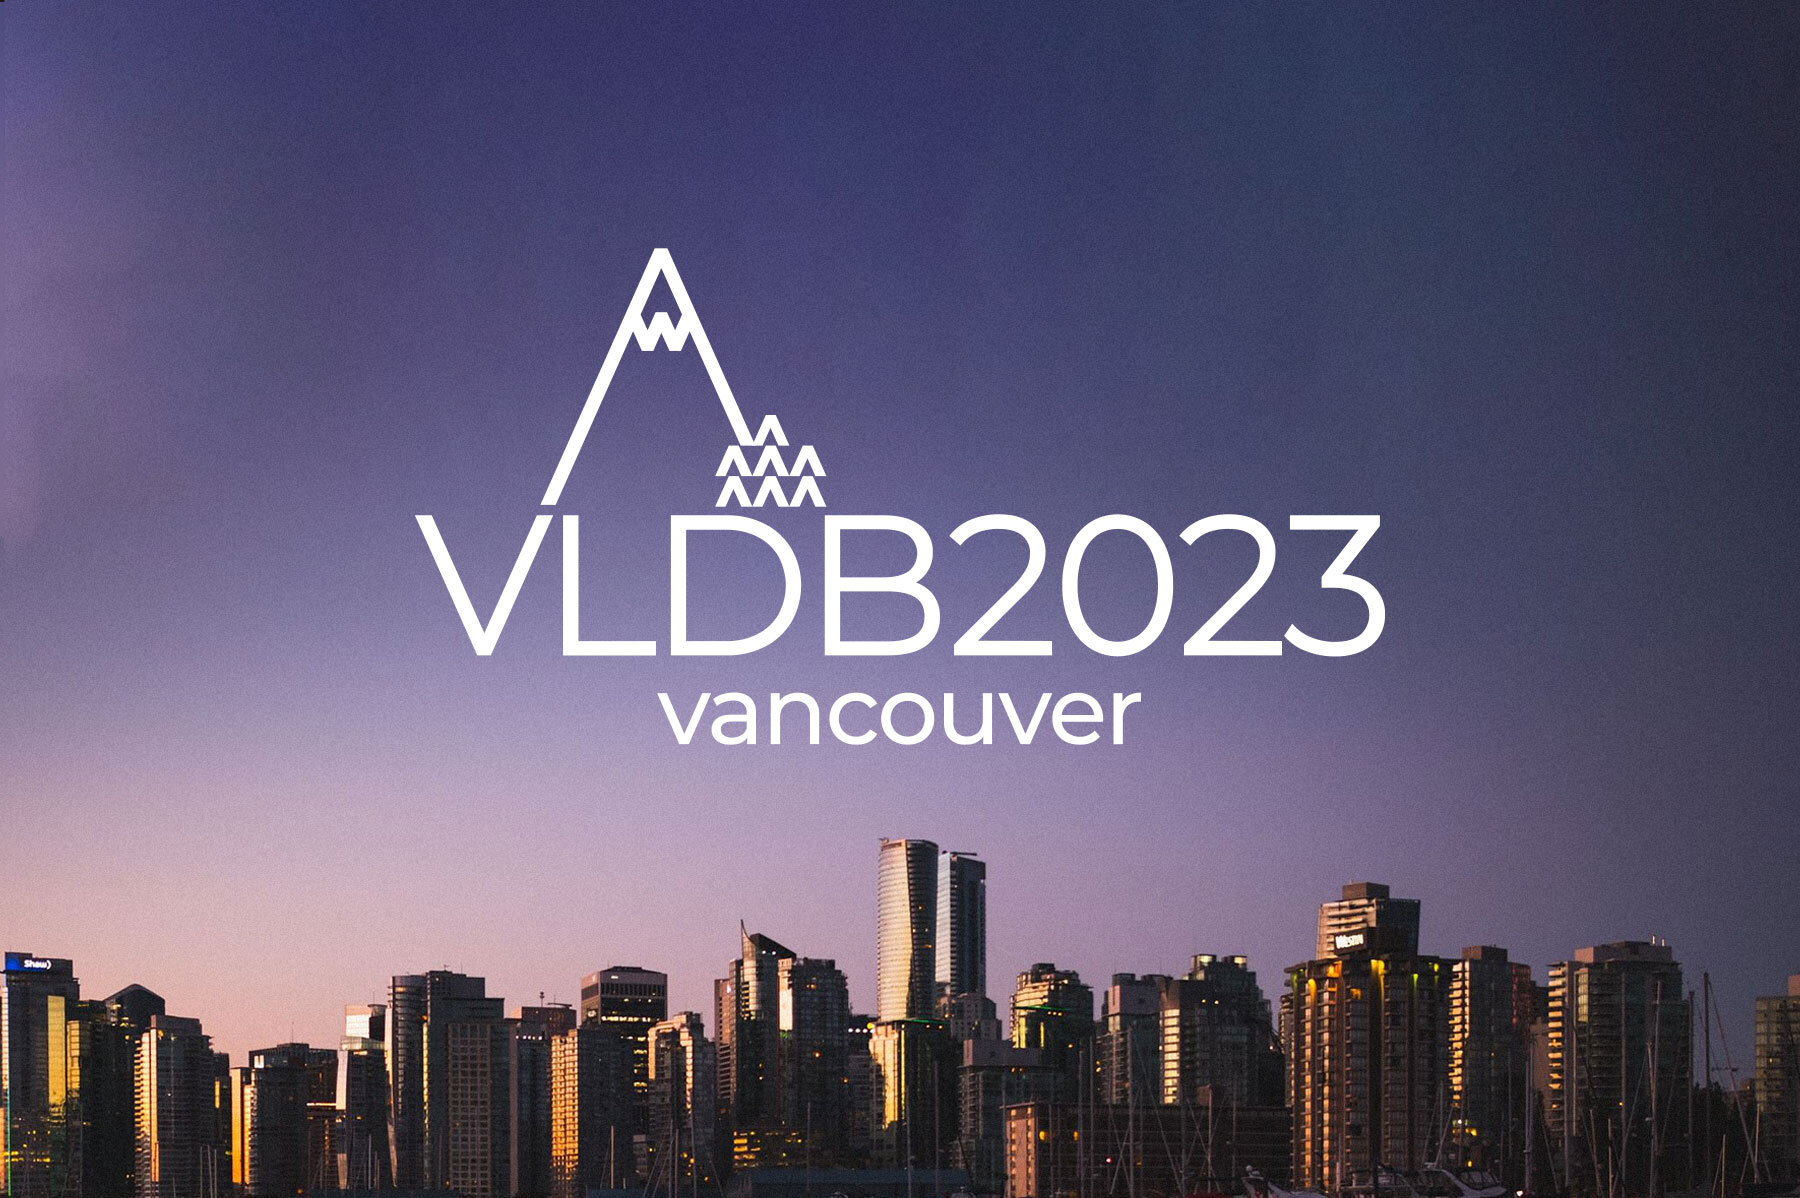 Image of Vancouver, Canada skyline with VLDB 2023 logo on top